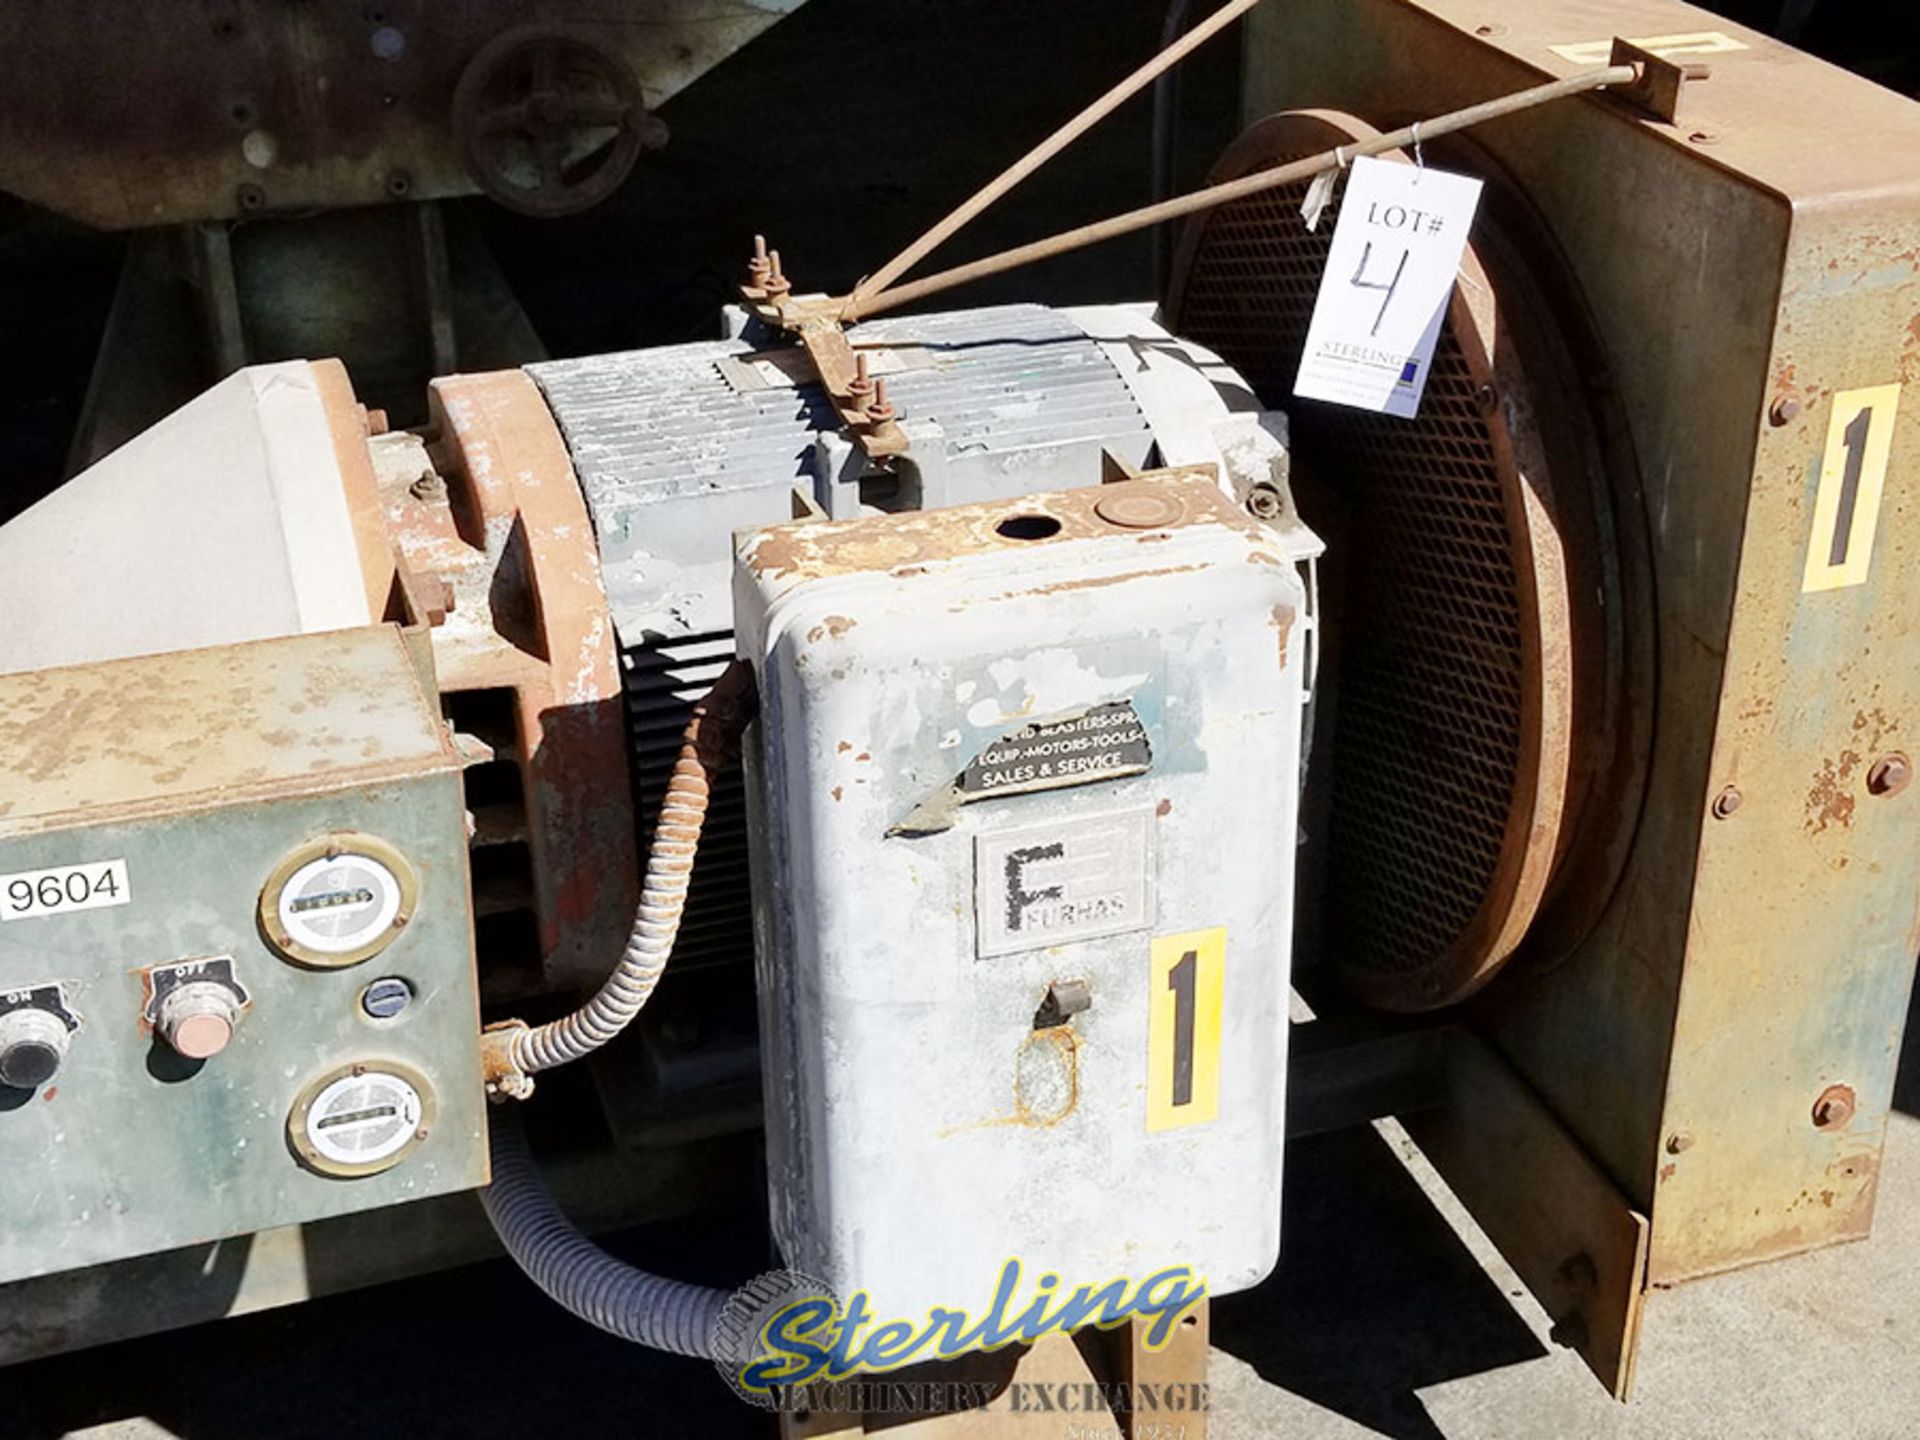 210 CFM Used Hydrovane Rotaryvane Air Compressor, Mdl. 170 CK, Fan Type Oil - Image 8 of 8